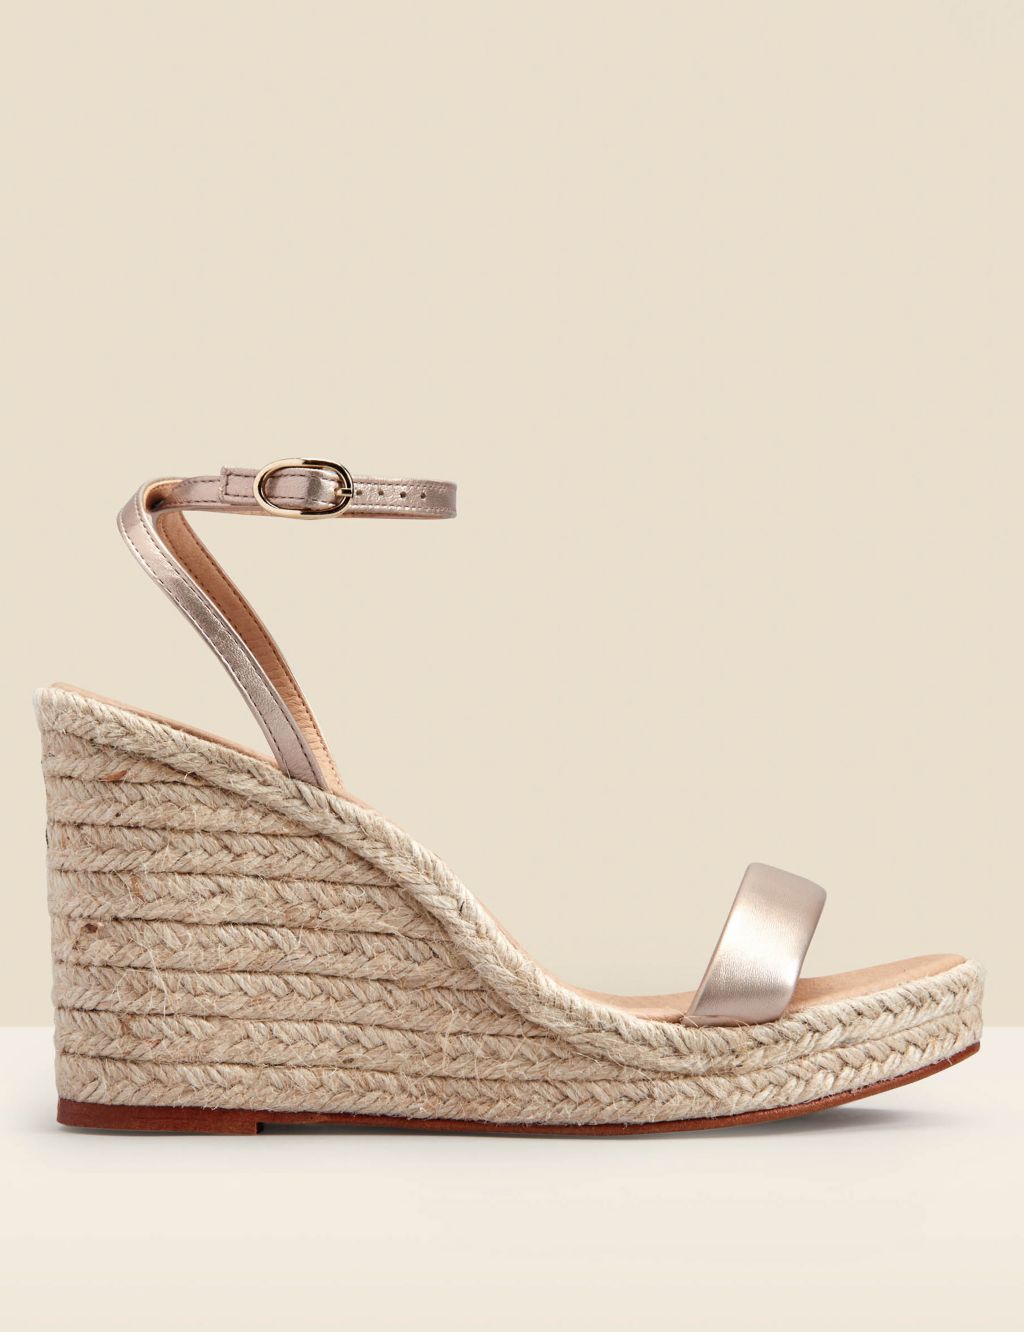 Leather Ankle Strap Wedge Espadrilles image 1